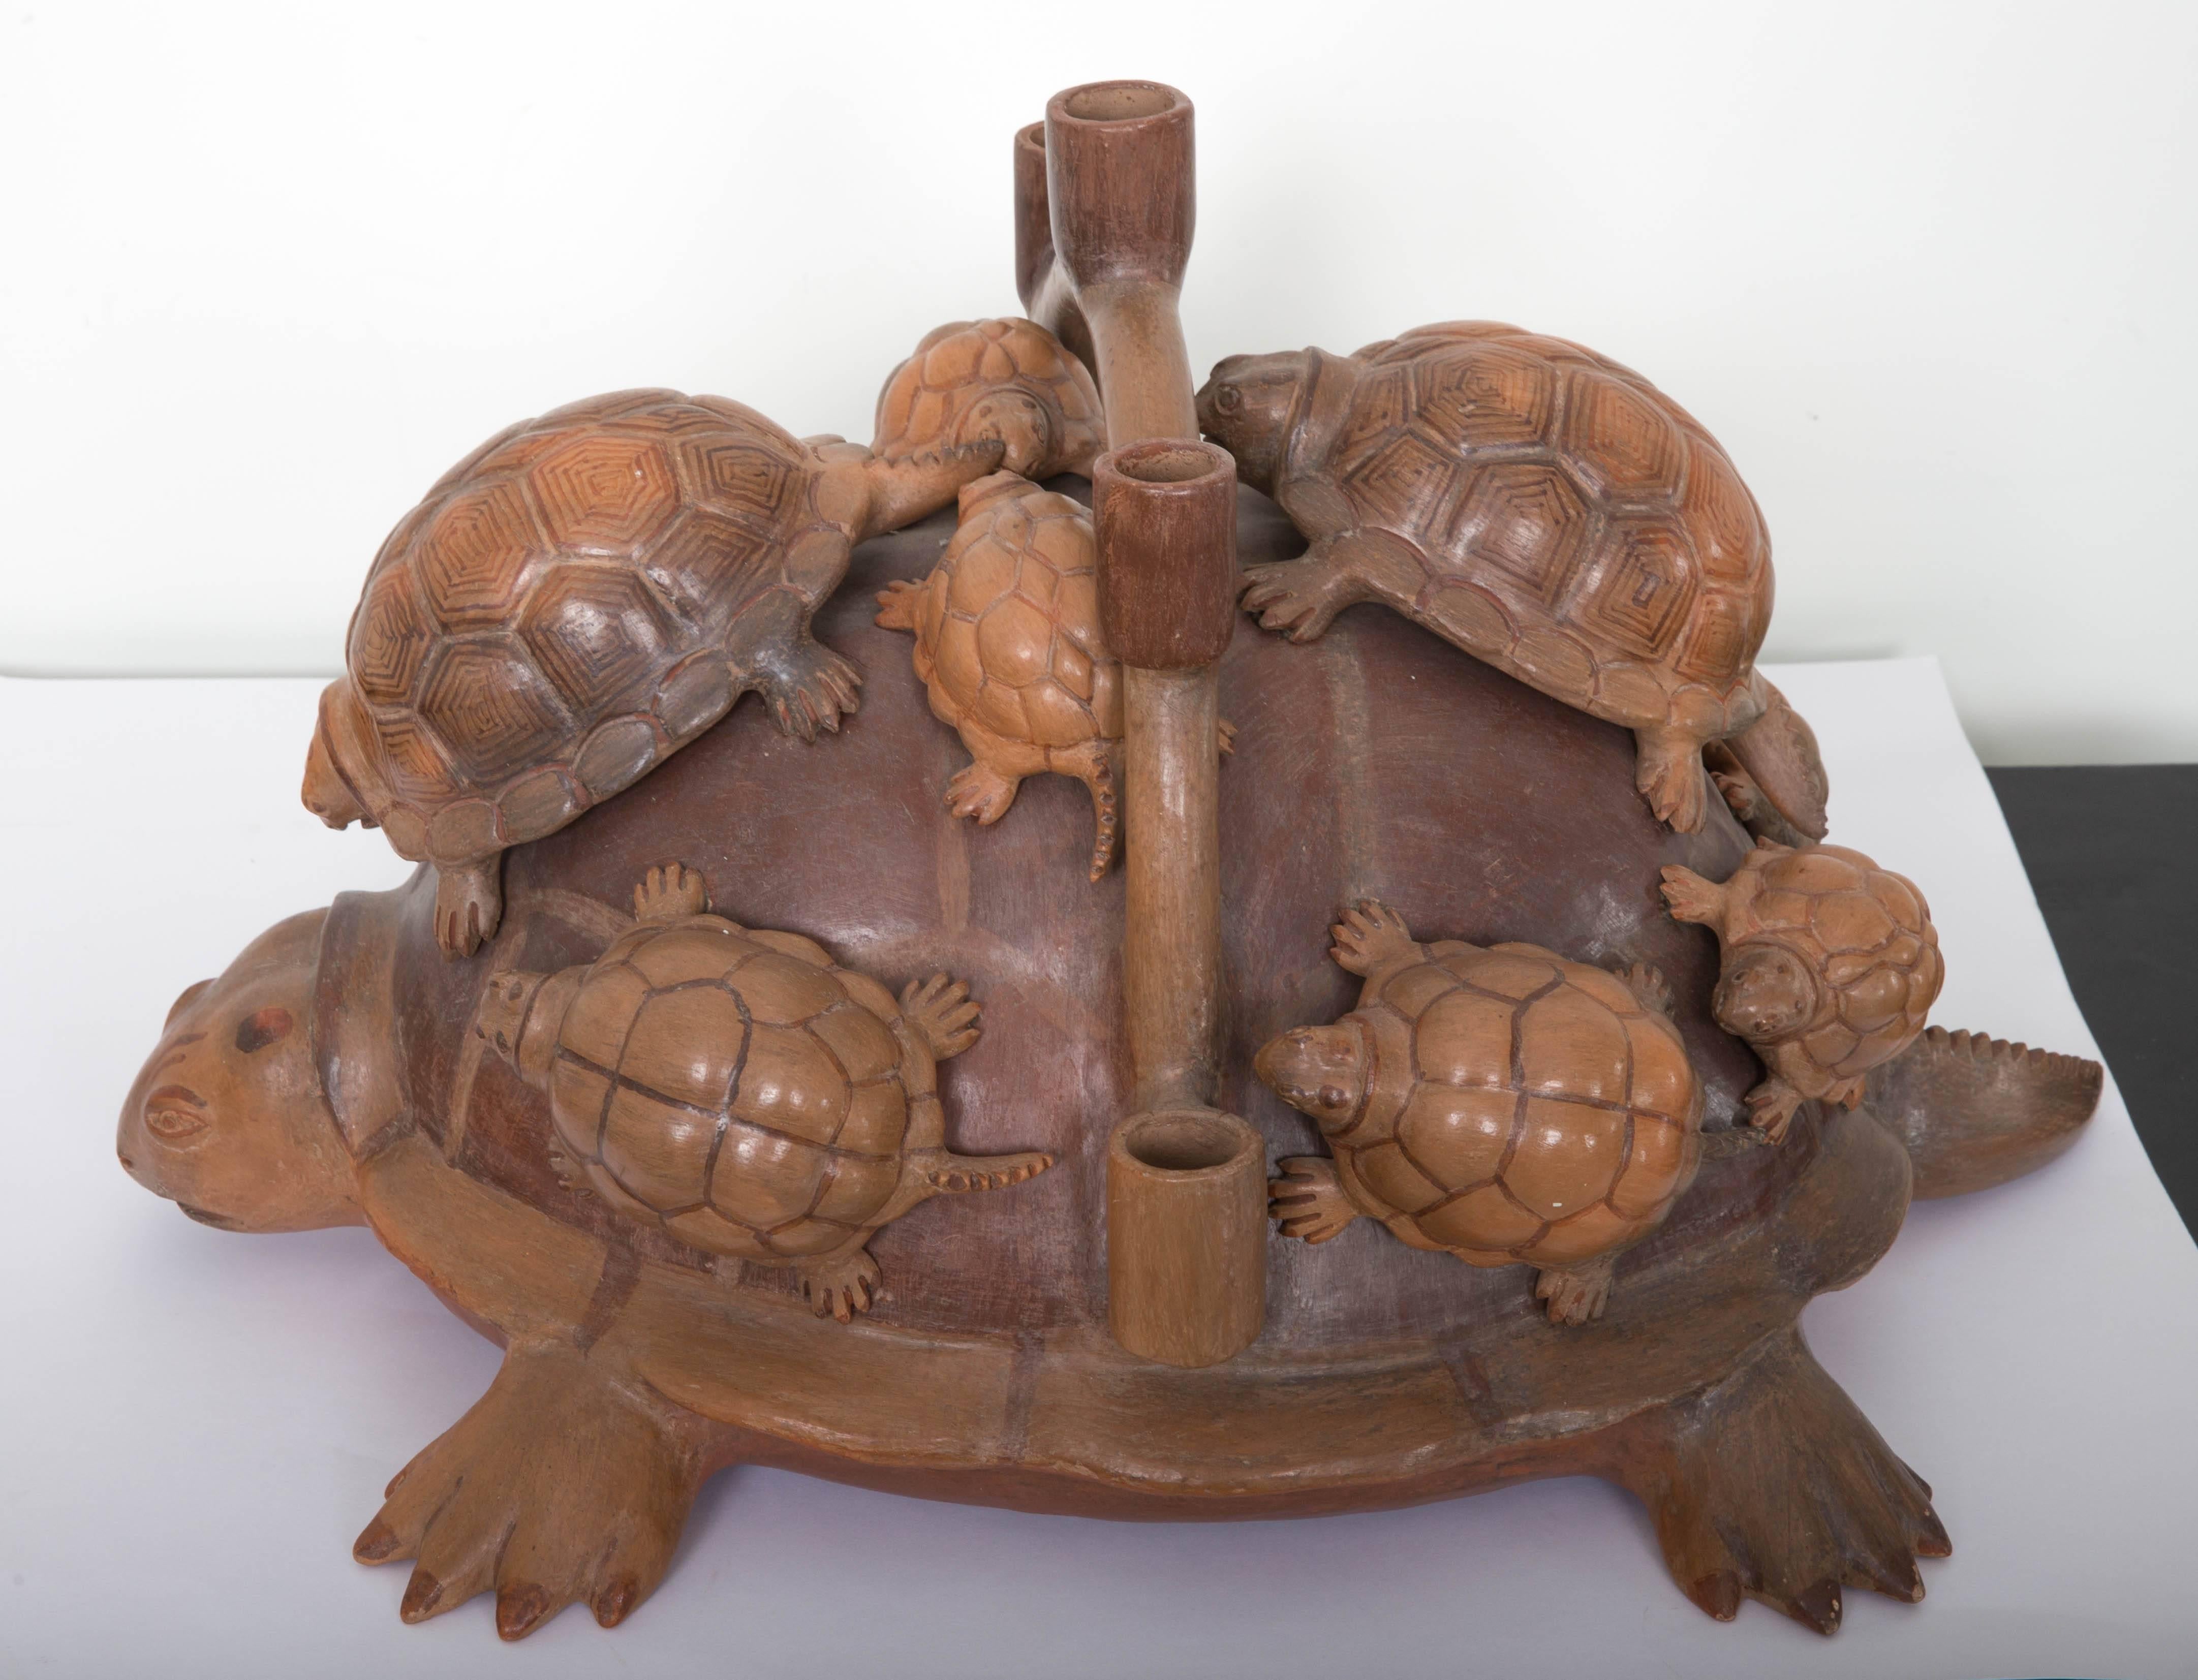 Large ceramic turtle with fie baby on turtle on back. Five candleholders across back. One front toe missing, one toe chipped shown in photos.